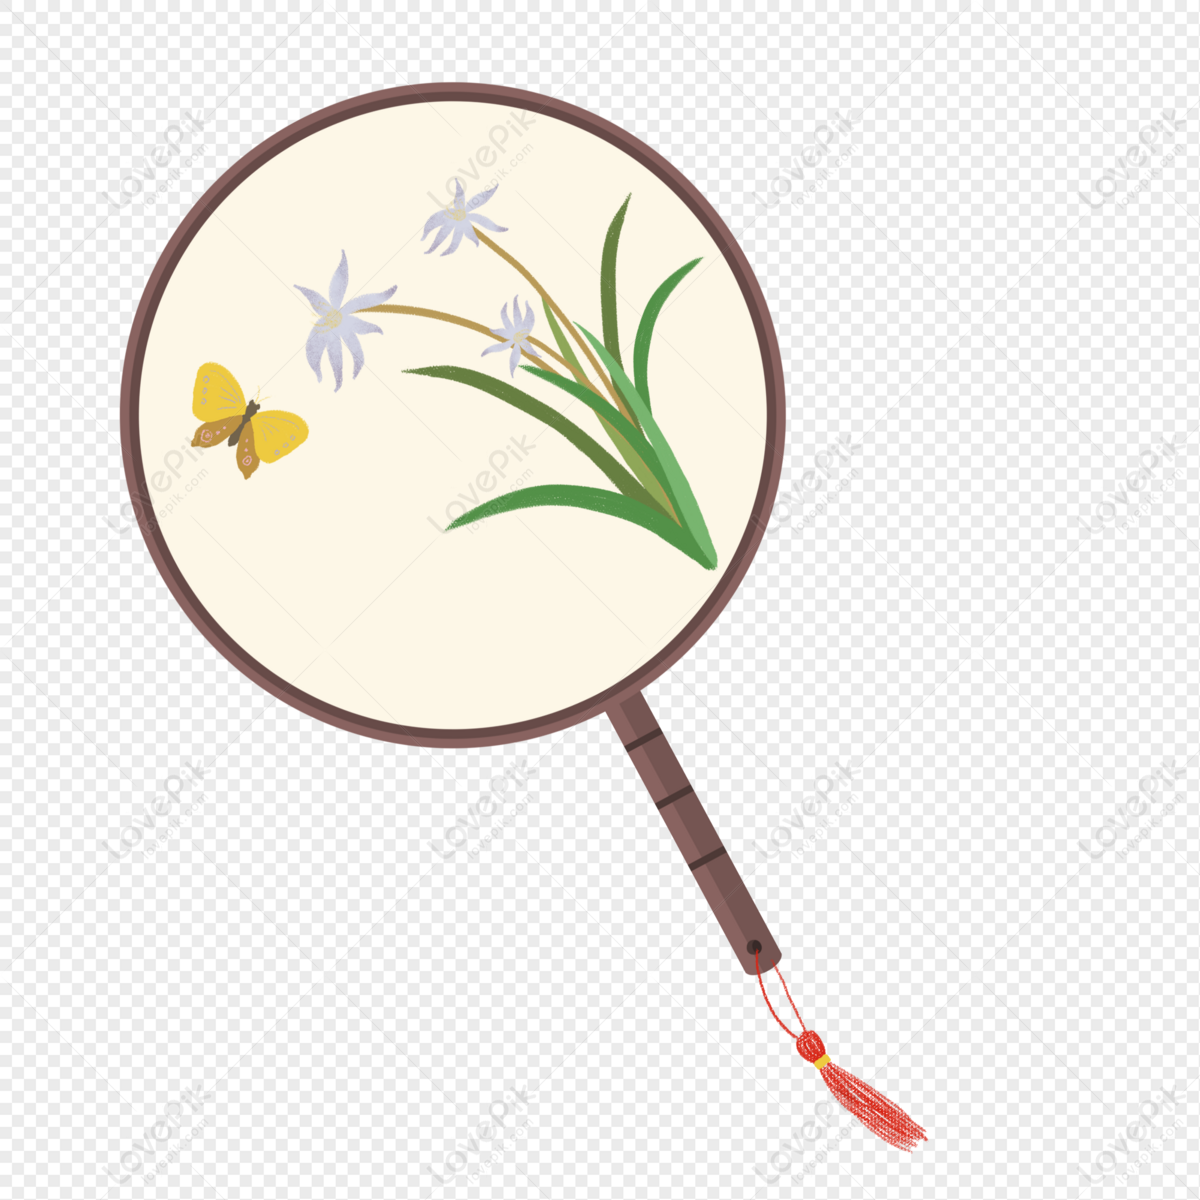 Chinese Style Round Fan PNG Image Free Download And Clipart Image ...